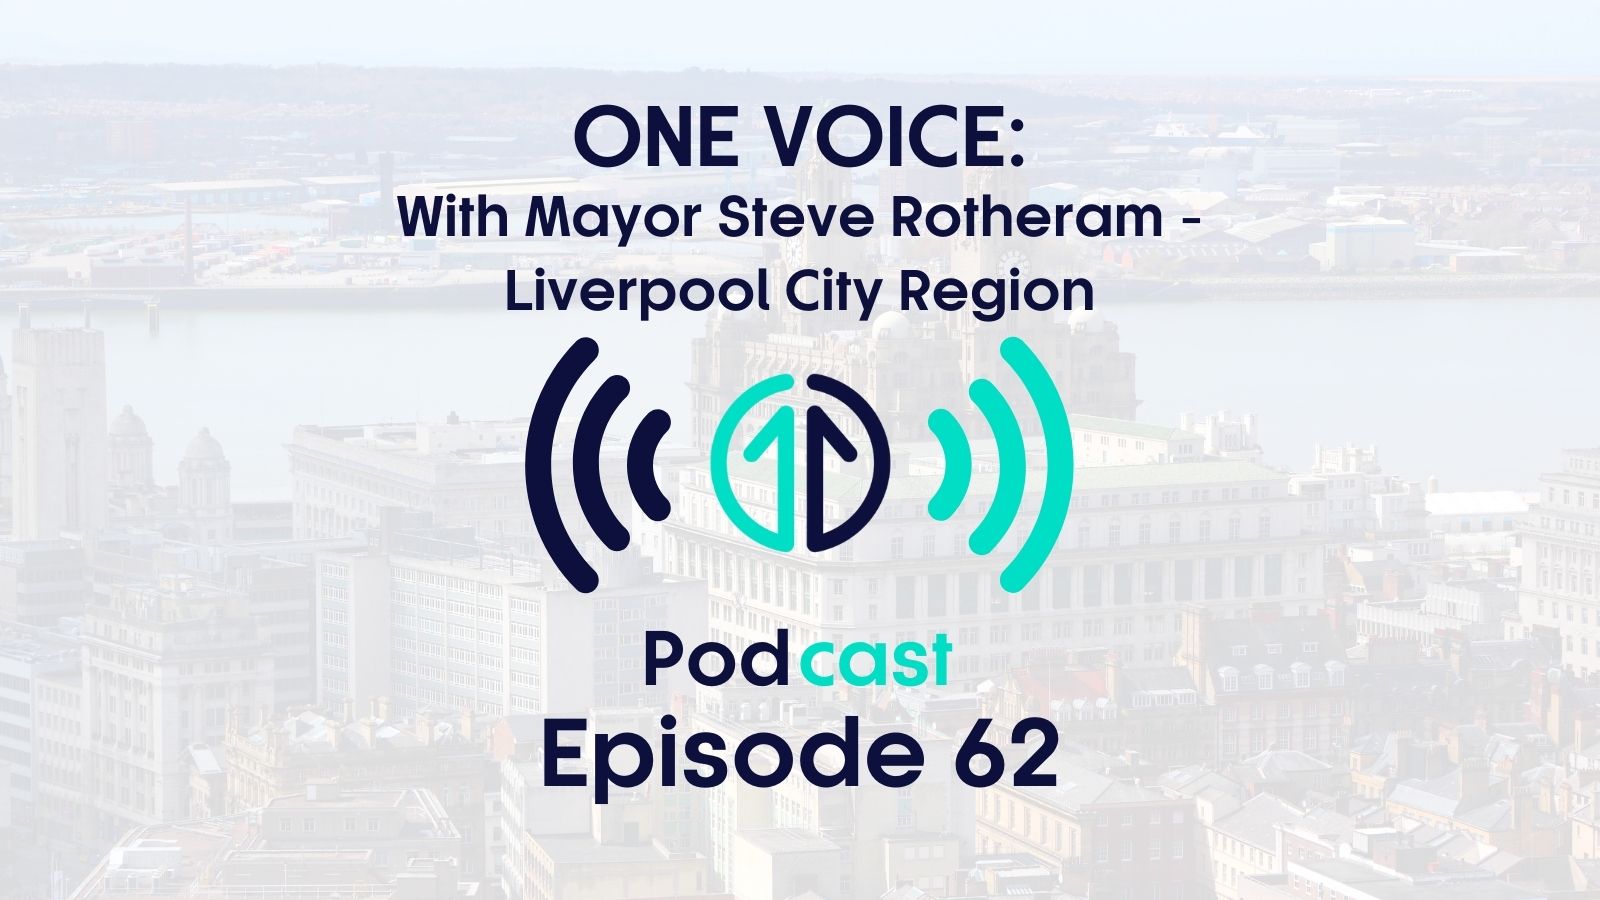 One Voice with Mayor Steve Rotheram, Liverpool City Region | Episode 62